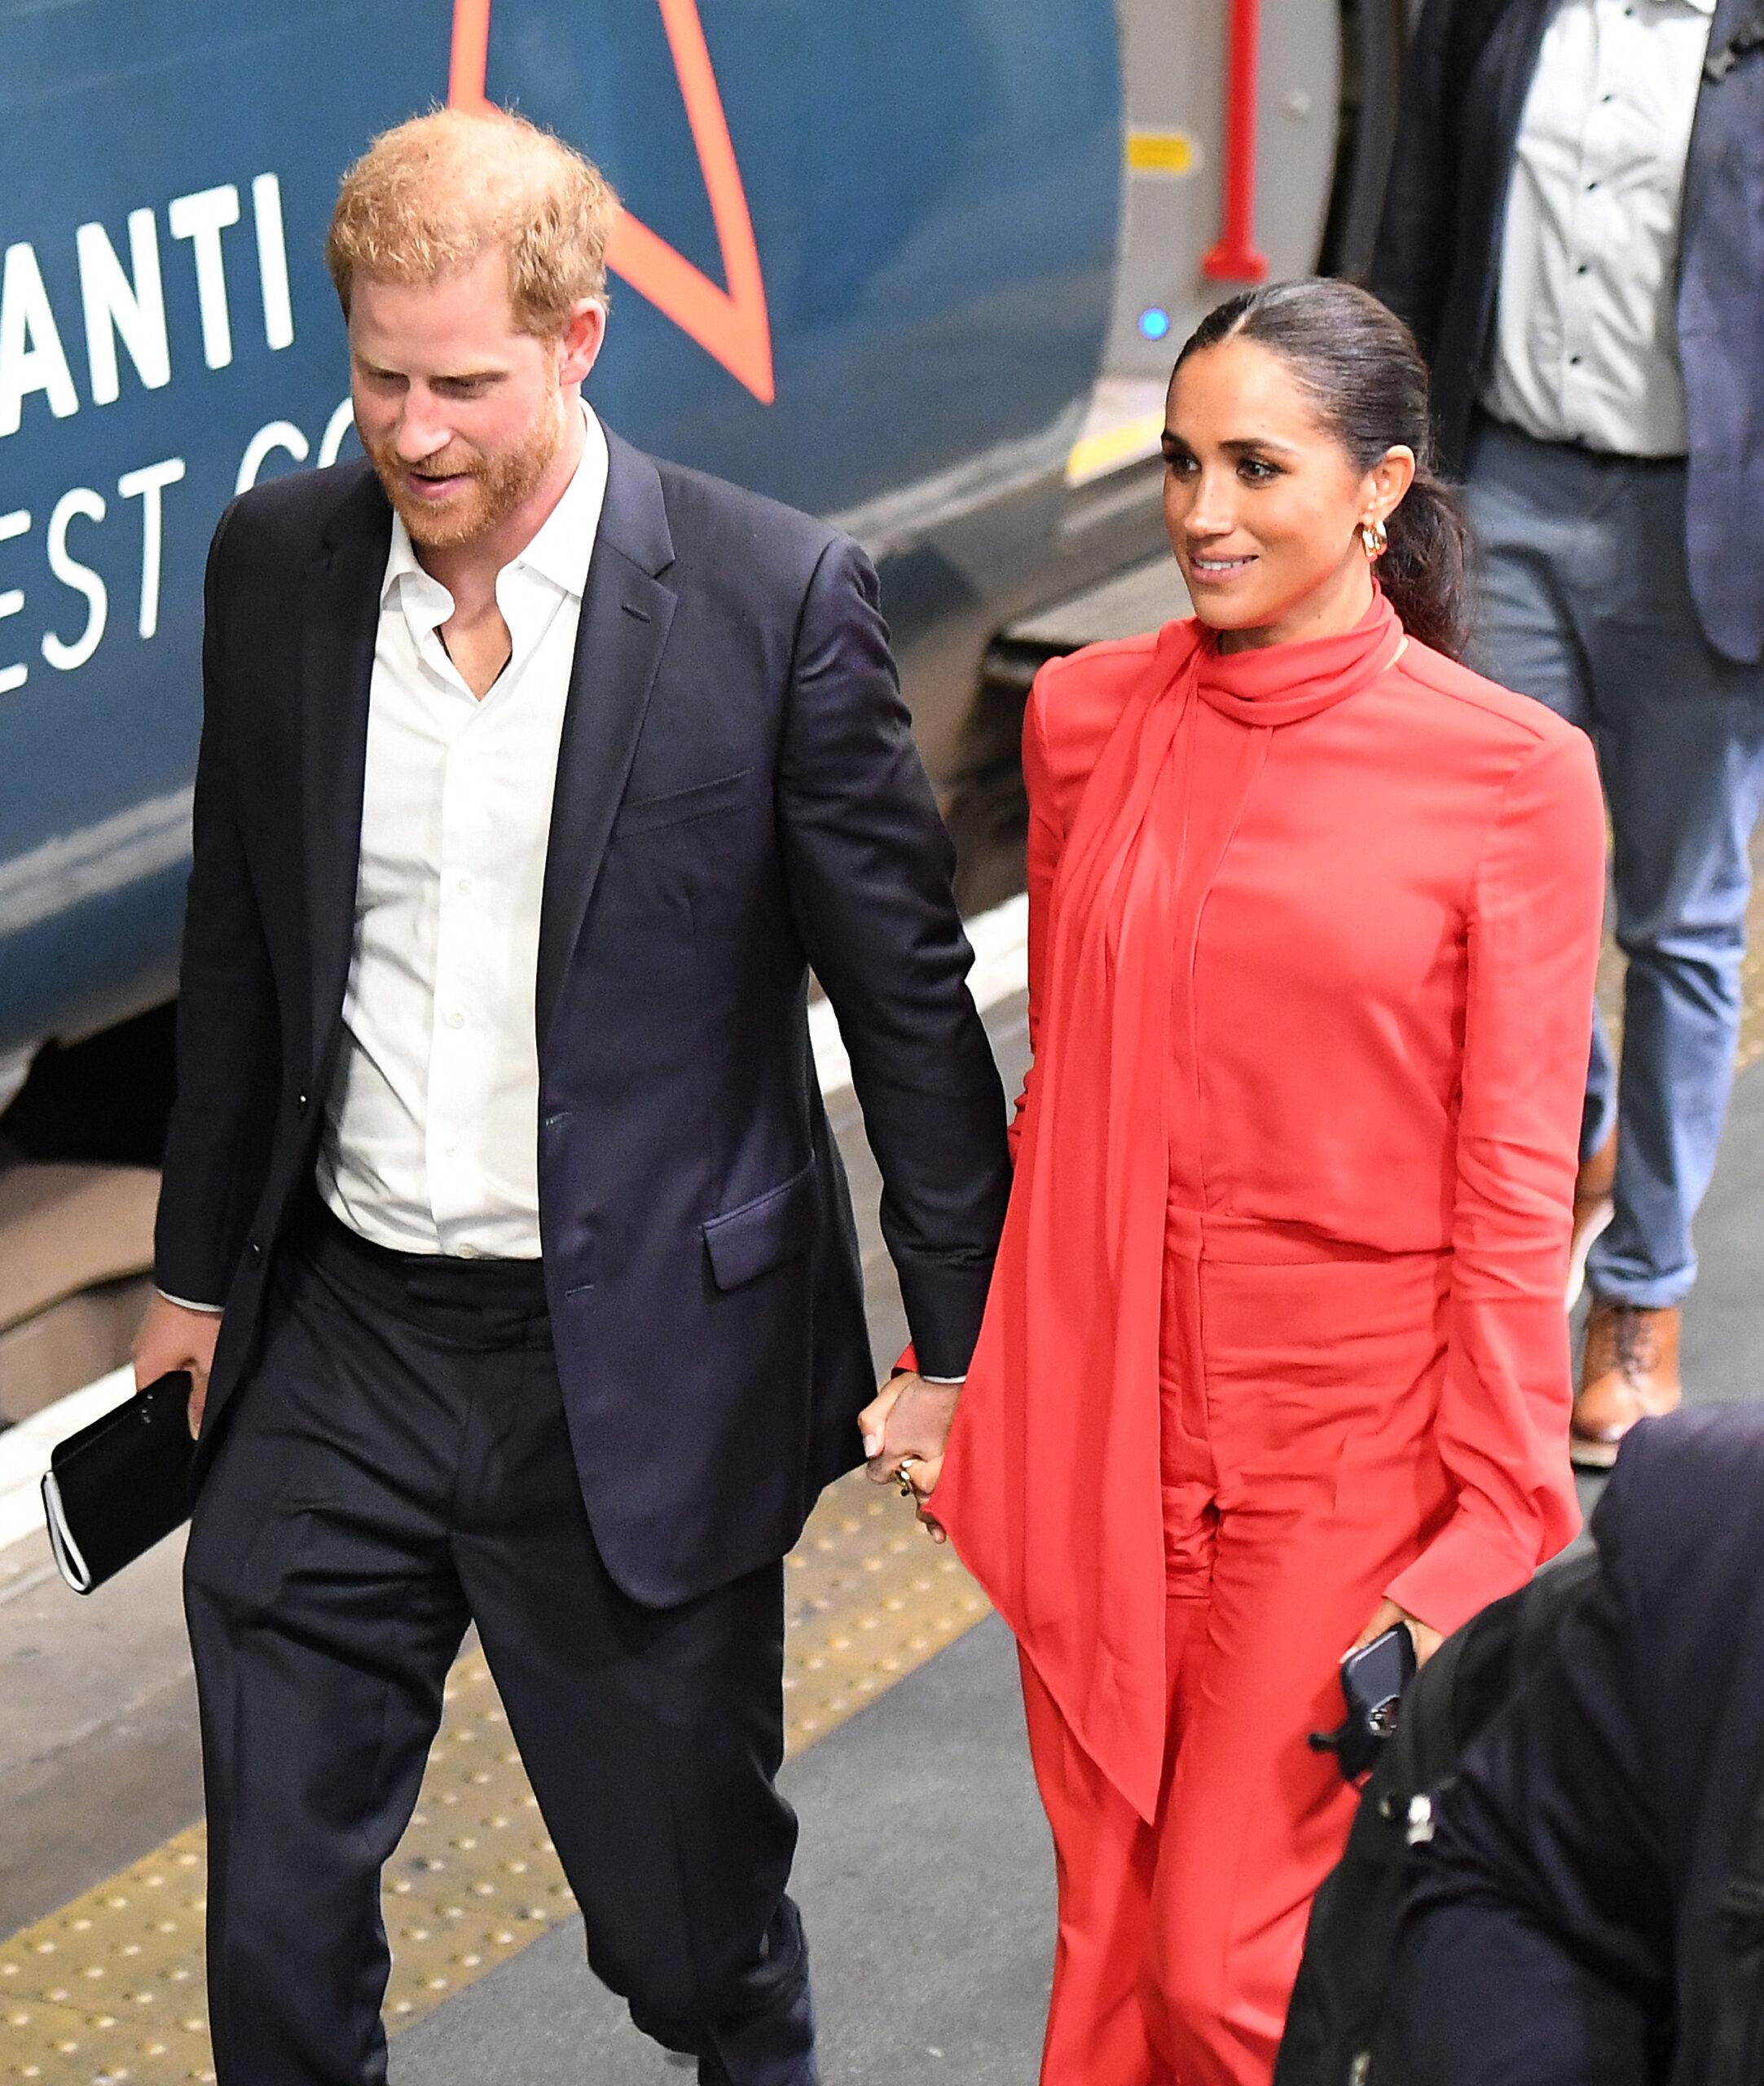 Prince Harry and Meghan Markle at Euston Station on a train from Manchester, having attended the One Young World summit